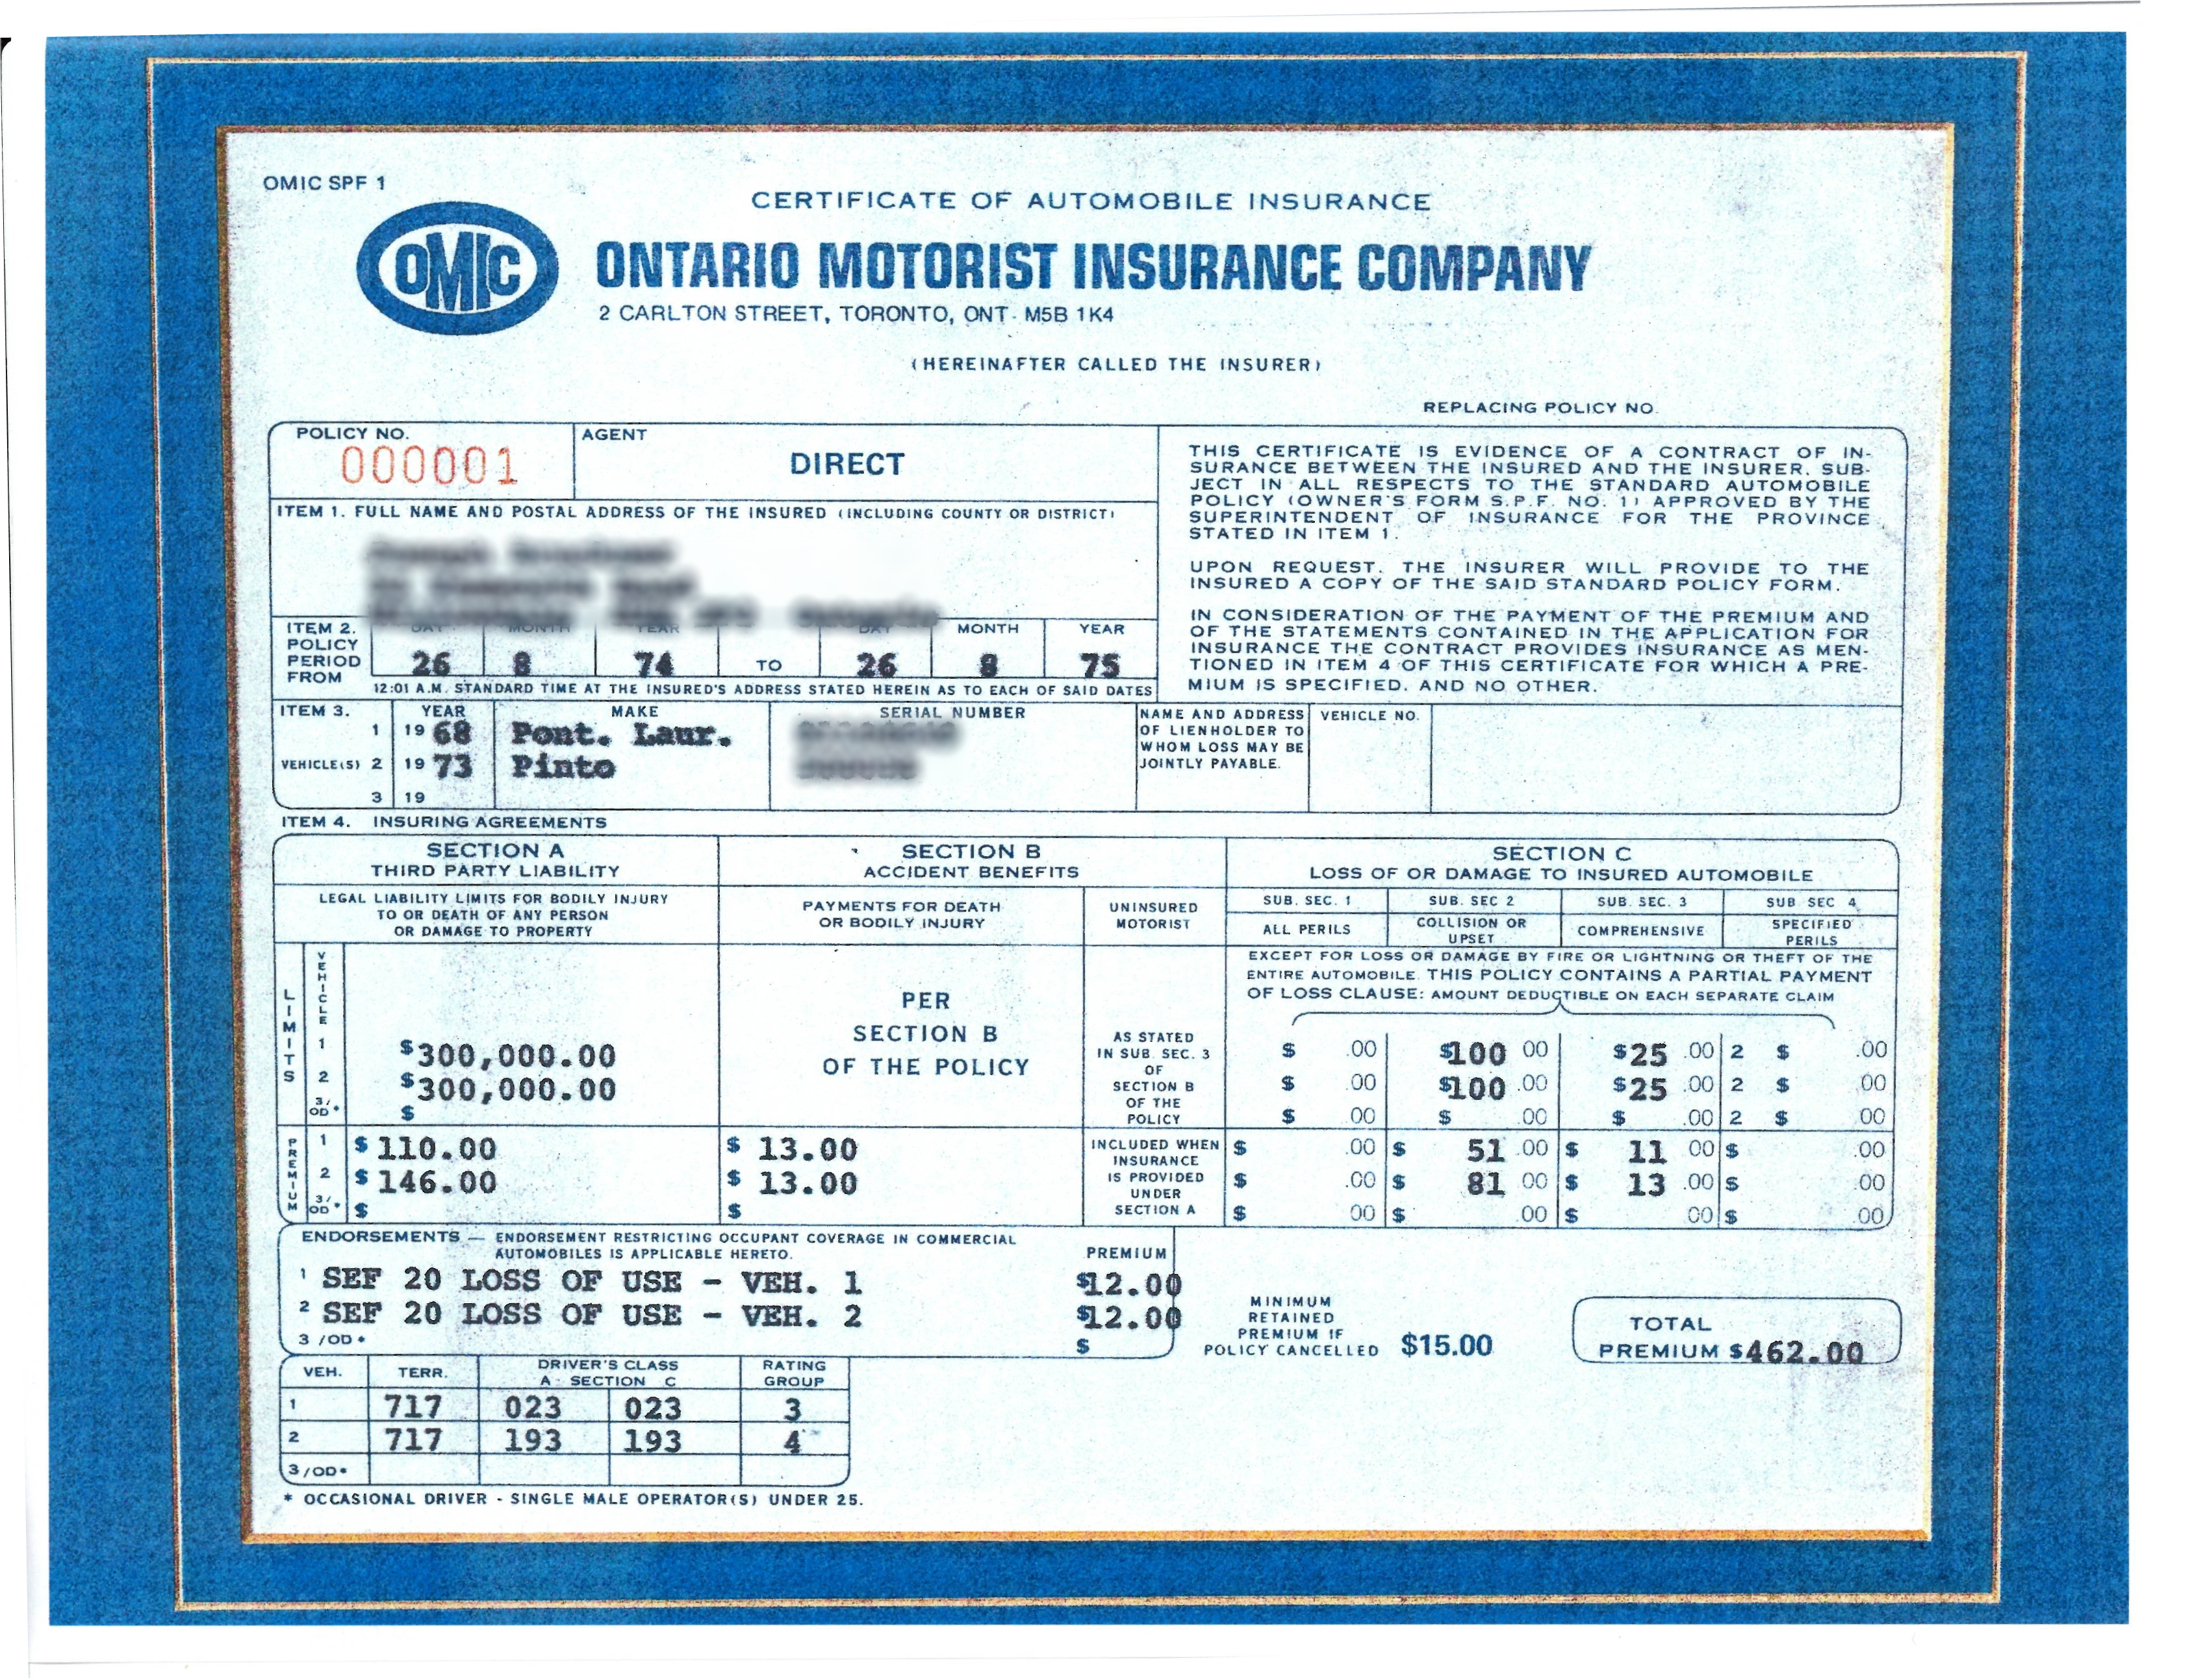 An image of an automobile insurance document of the first policy ever sold by CAA Insurance in 1974.